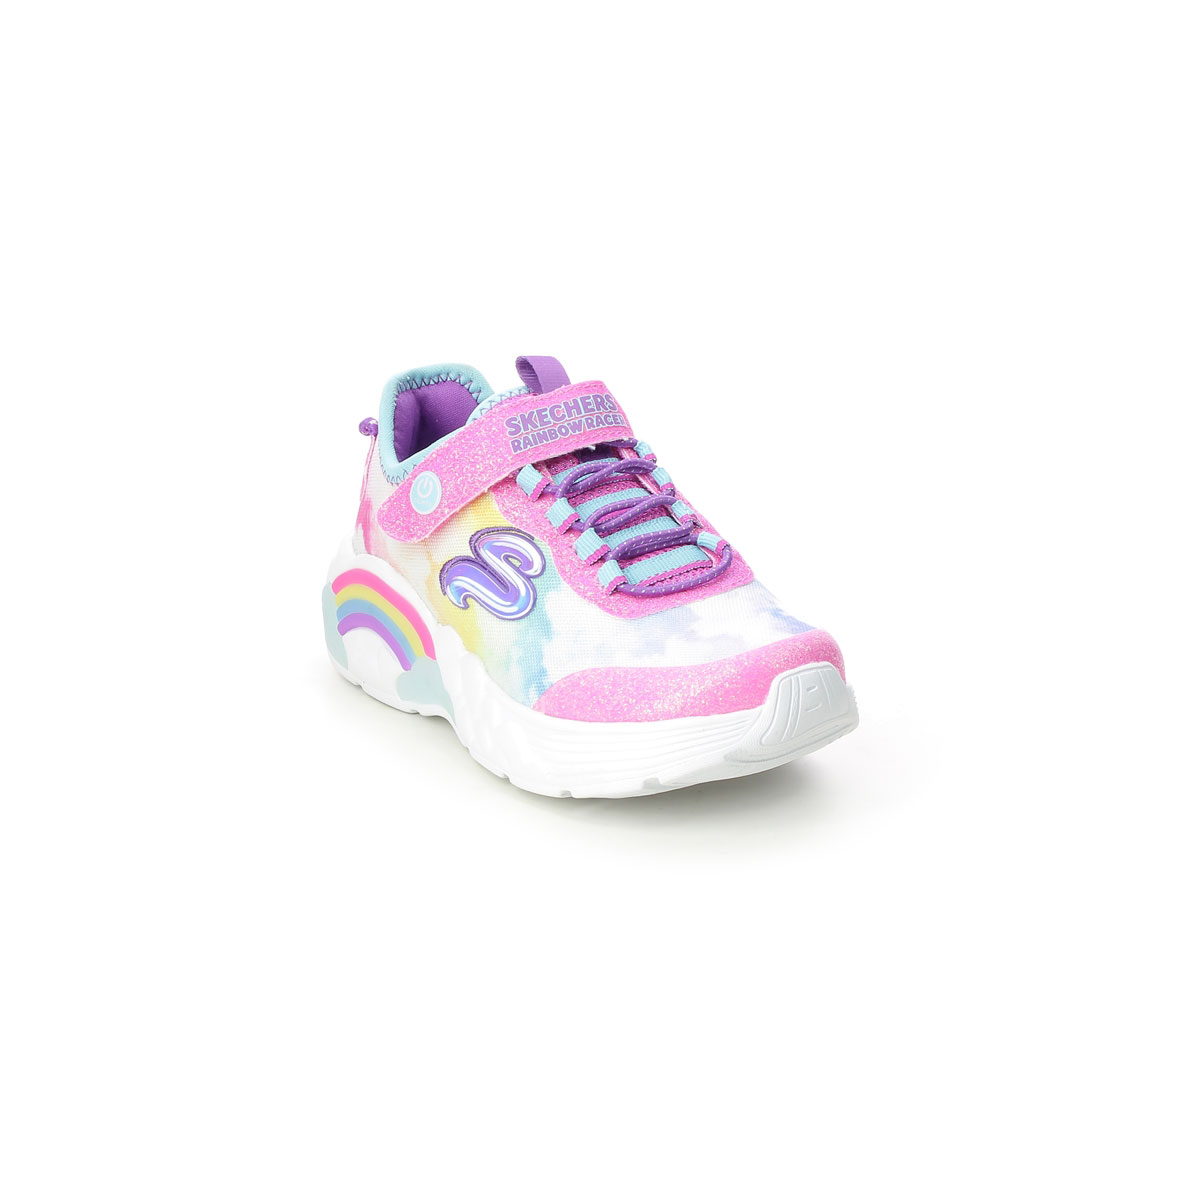 Skechers Rainbow Racer Pink Kids Girls Trainers 302300L In Size 28 In Plain Pink For kids